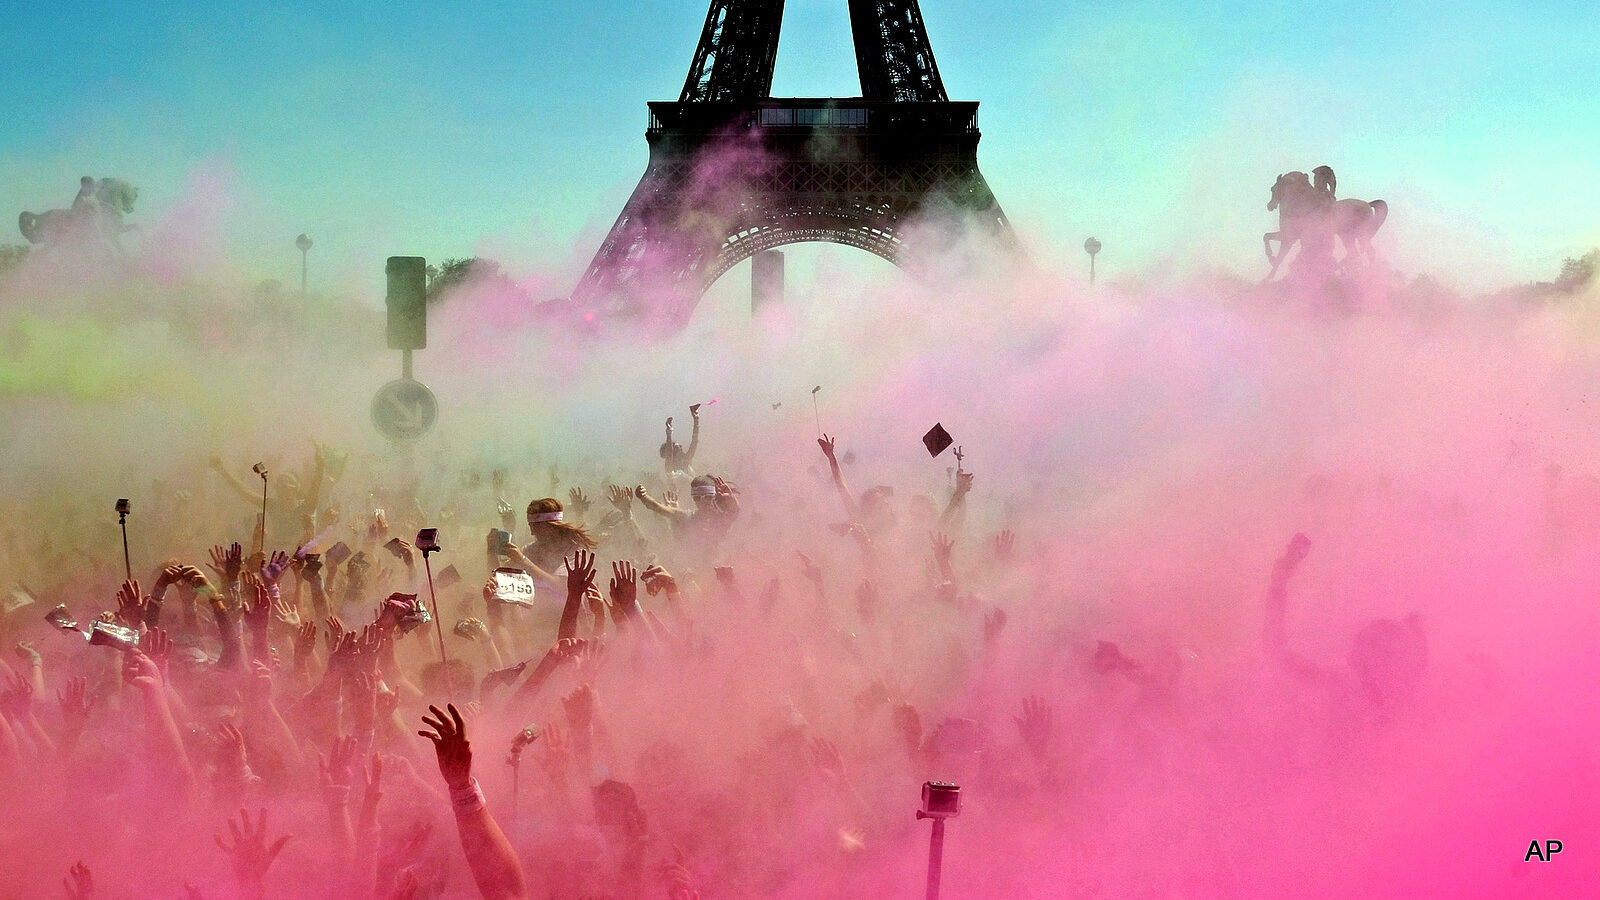 People take part in the Color Run near the Eiffel Tower, in Paris, France, Sunday, April 19, 2015. The Color Run is a 5 kilometer (3.1 mile) running event where participants are covered in bright colored powder at each check station and is less about speed and more about enjoying a day with friends and family.